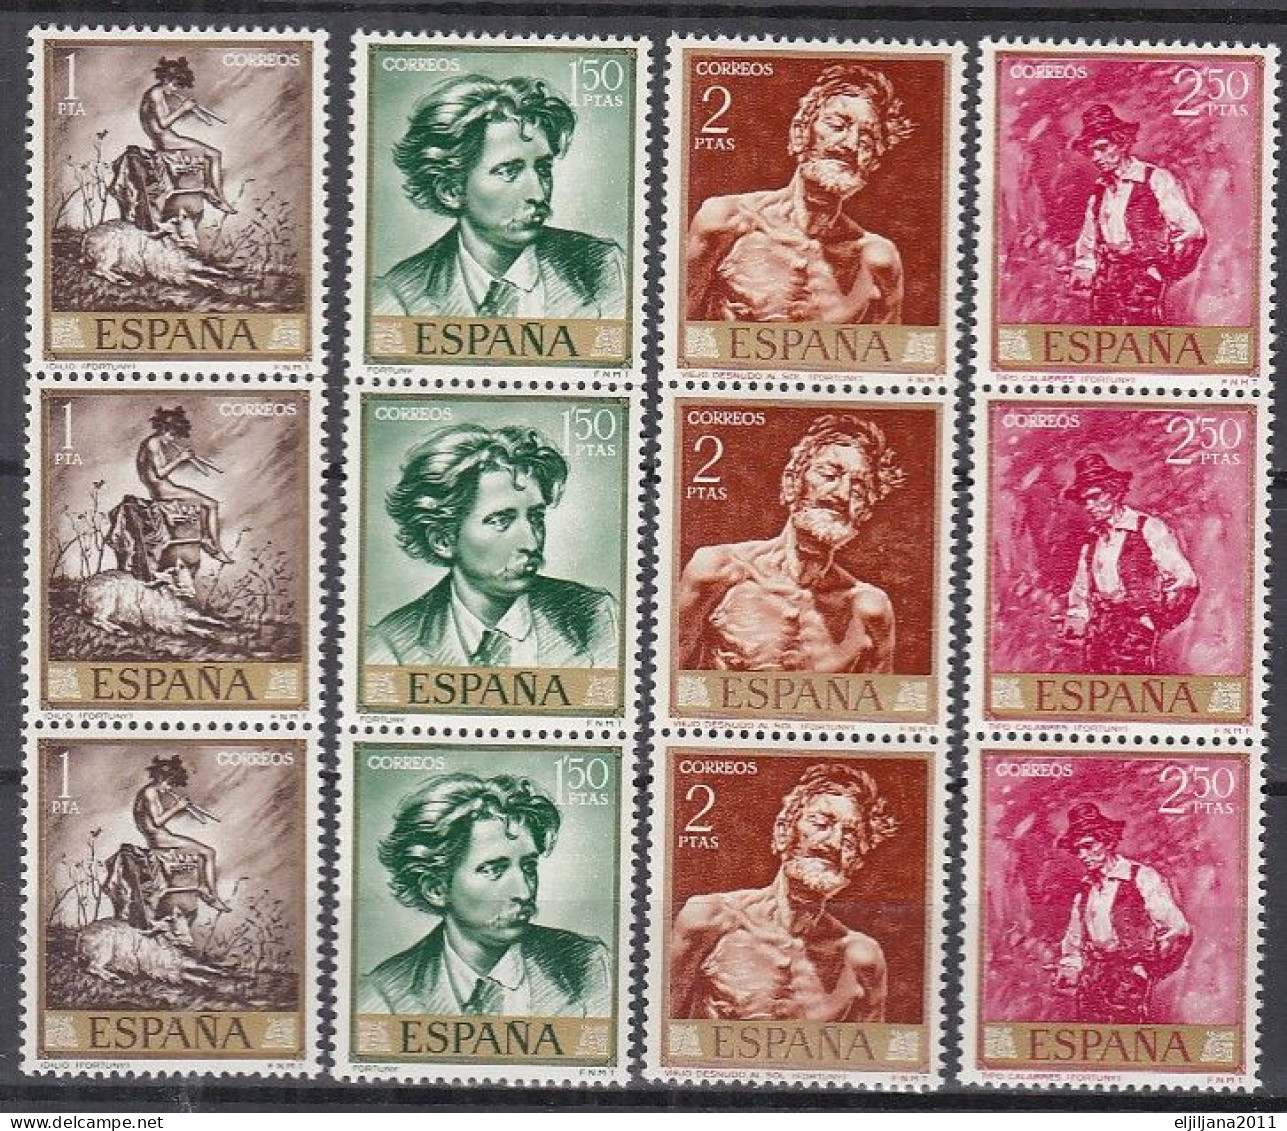 ⁕ SPAIN / ESPANA 1968 ⁕ Mariano Fortuny (stamp Day) Art Painting Gemalde Mi.1740-1749 ⁕ MNH ( 43 Stamps ) - Unused Stamps